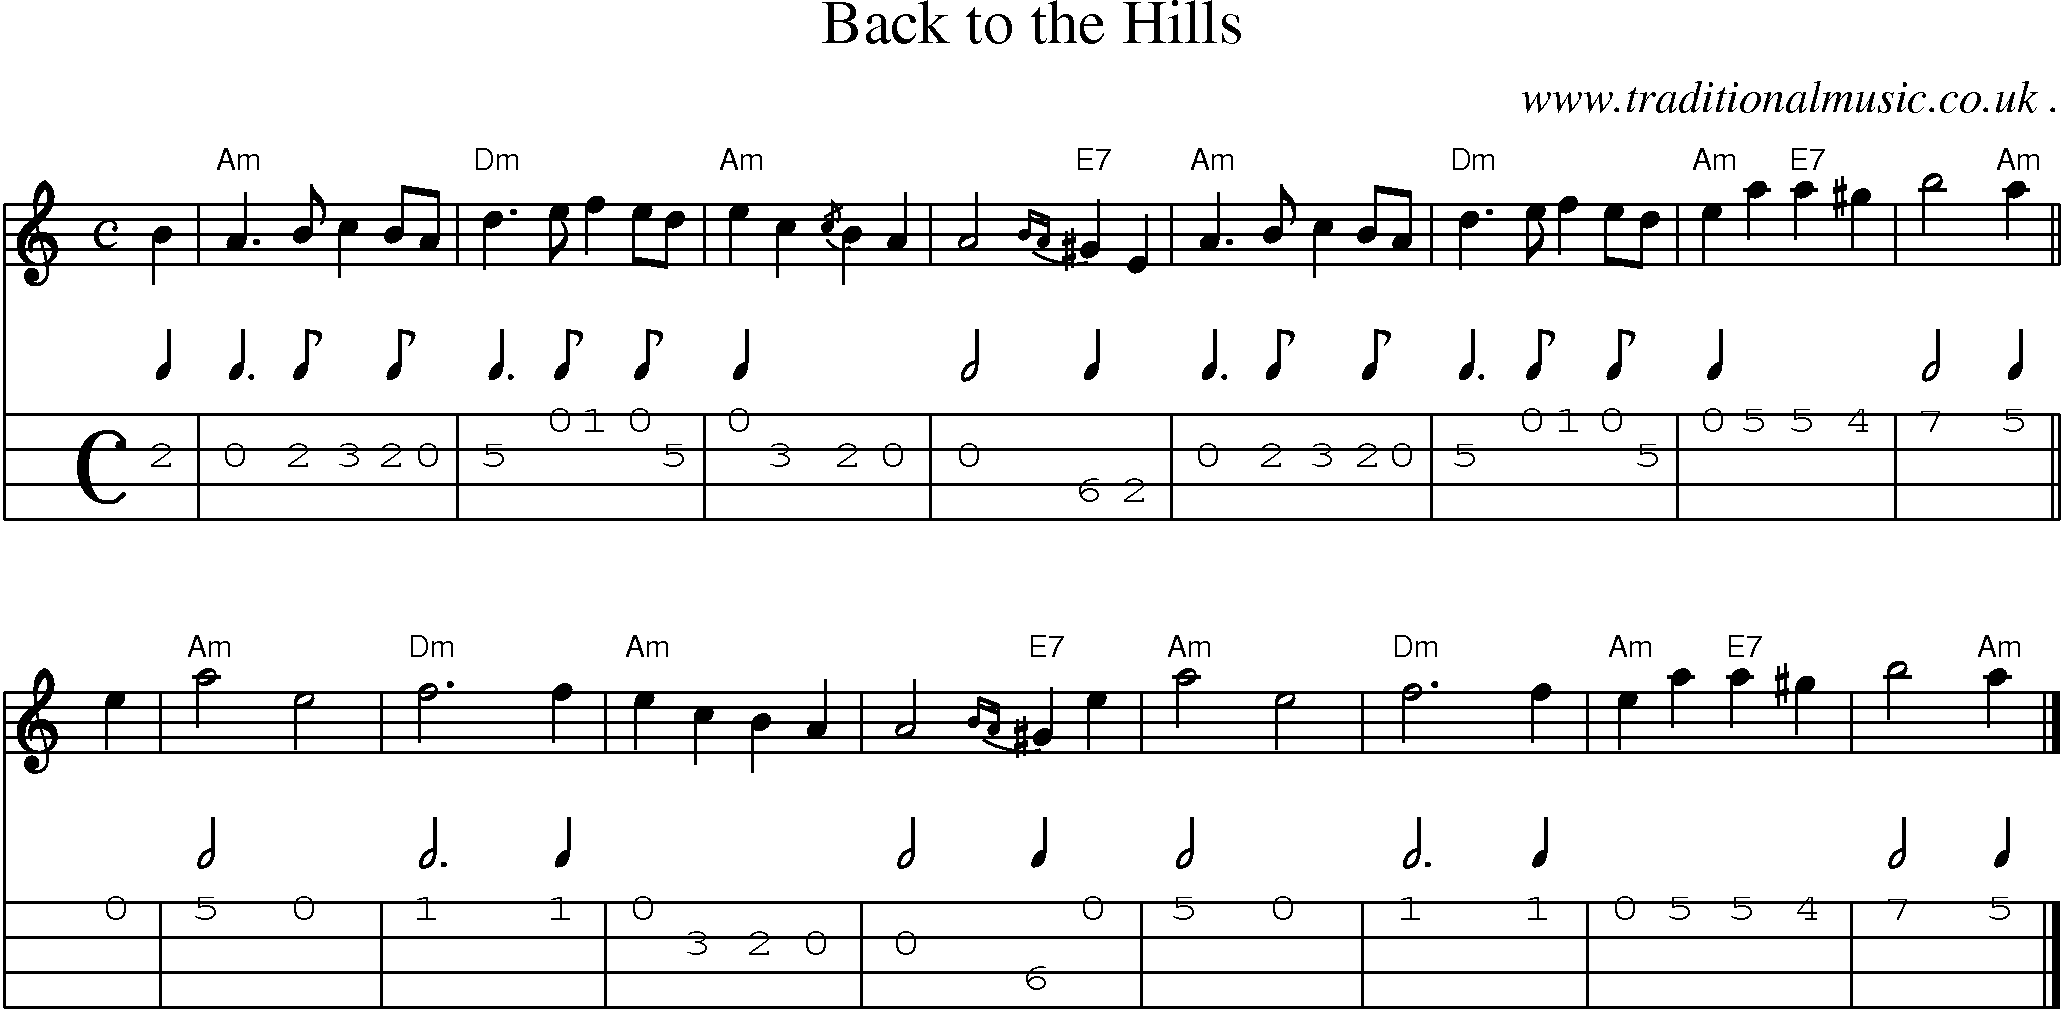 Sheet-music  score, Chords and Mandolin Tabs for Back To The Hills